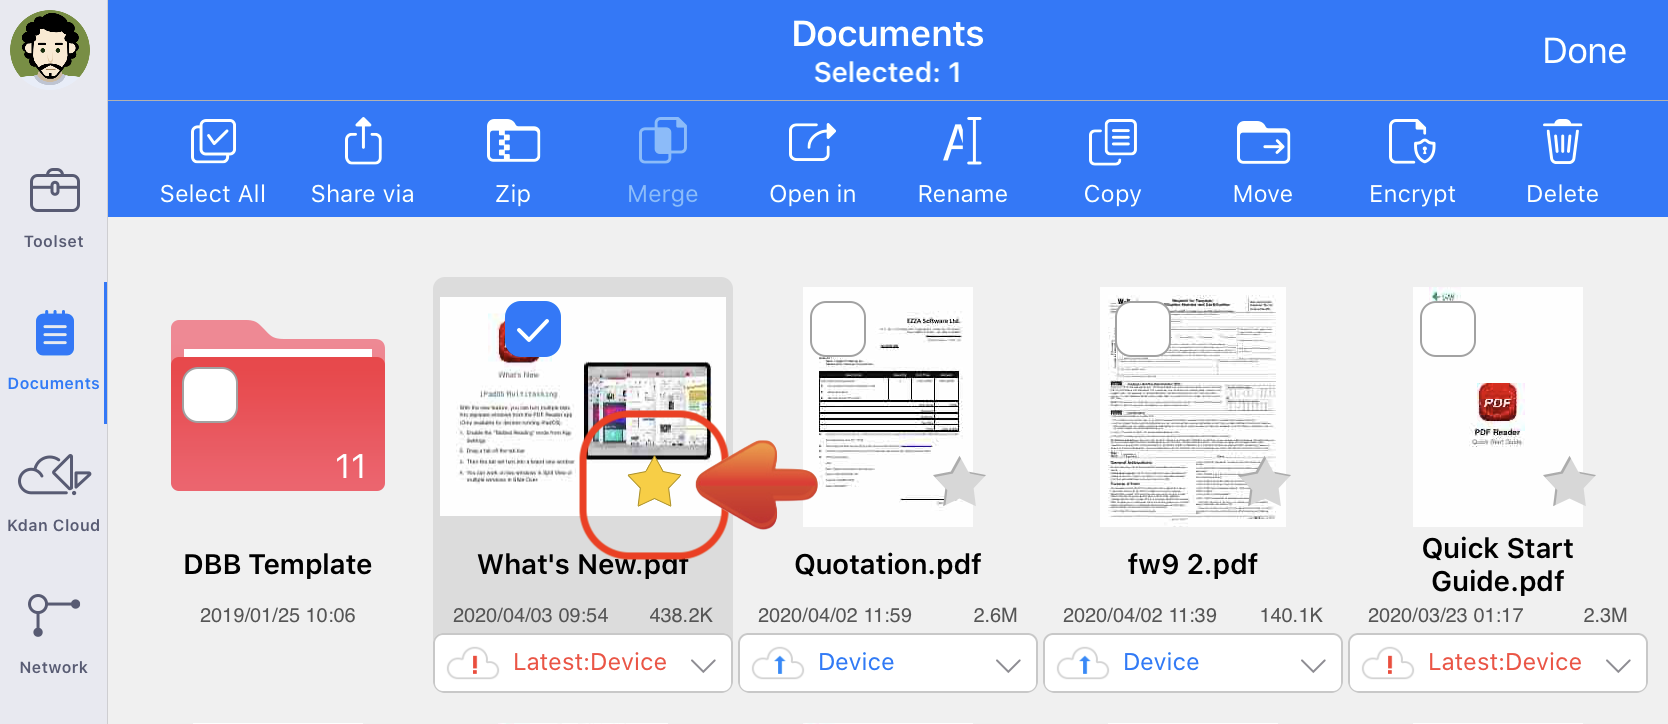 Documents_Add_to_Favorite.PNG